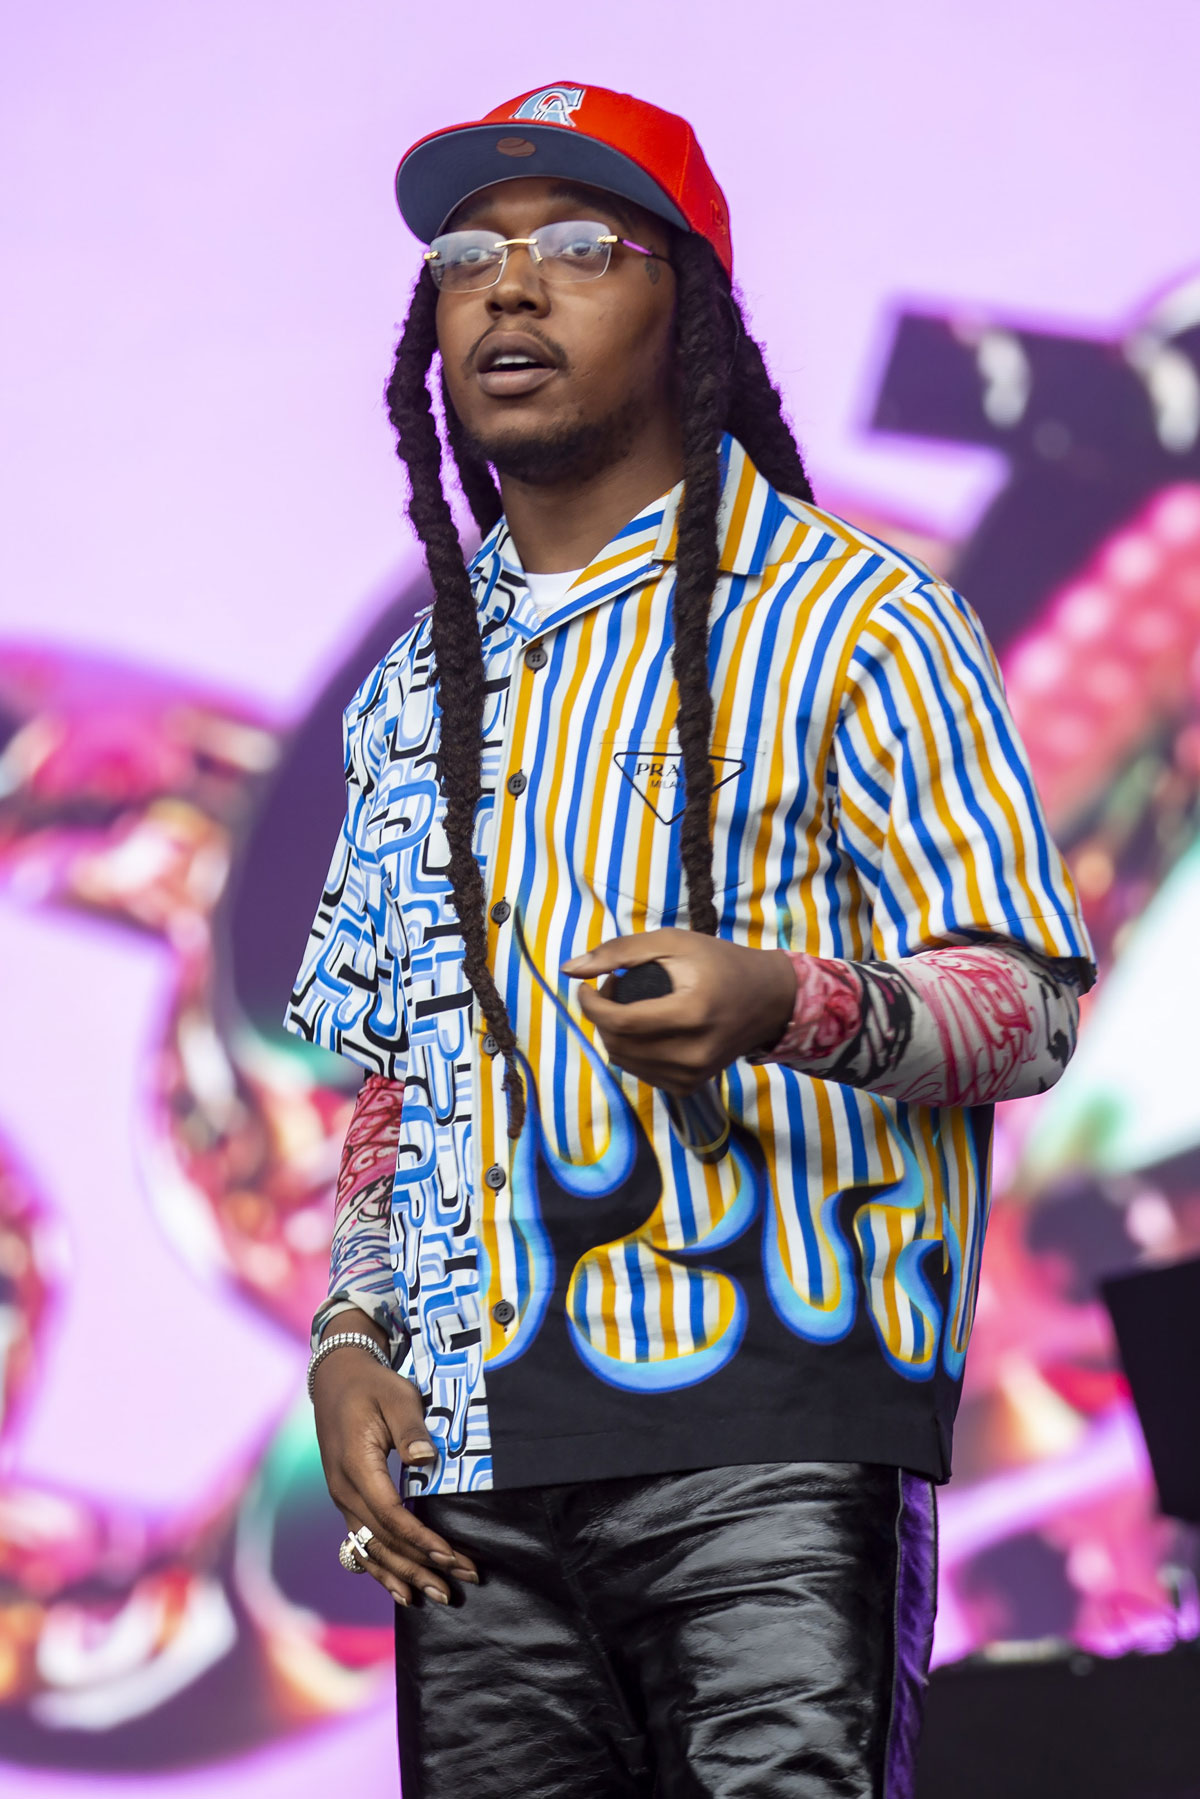 Takeoff of Migos performing at Parklife Festival in September 2021